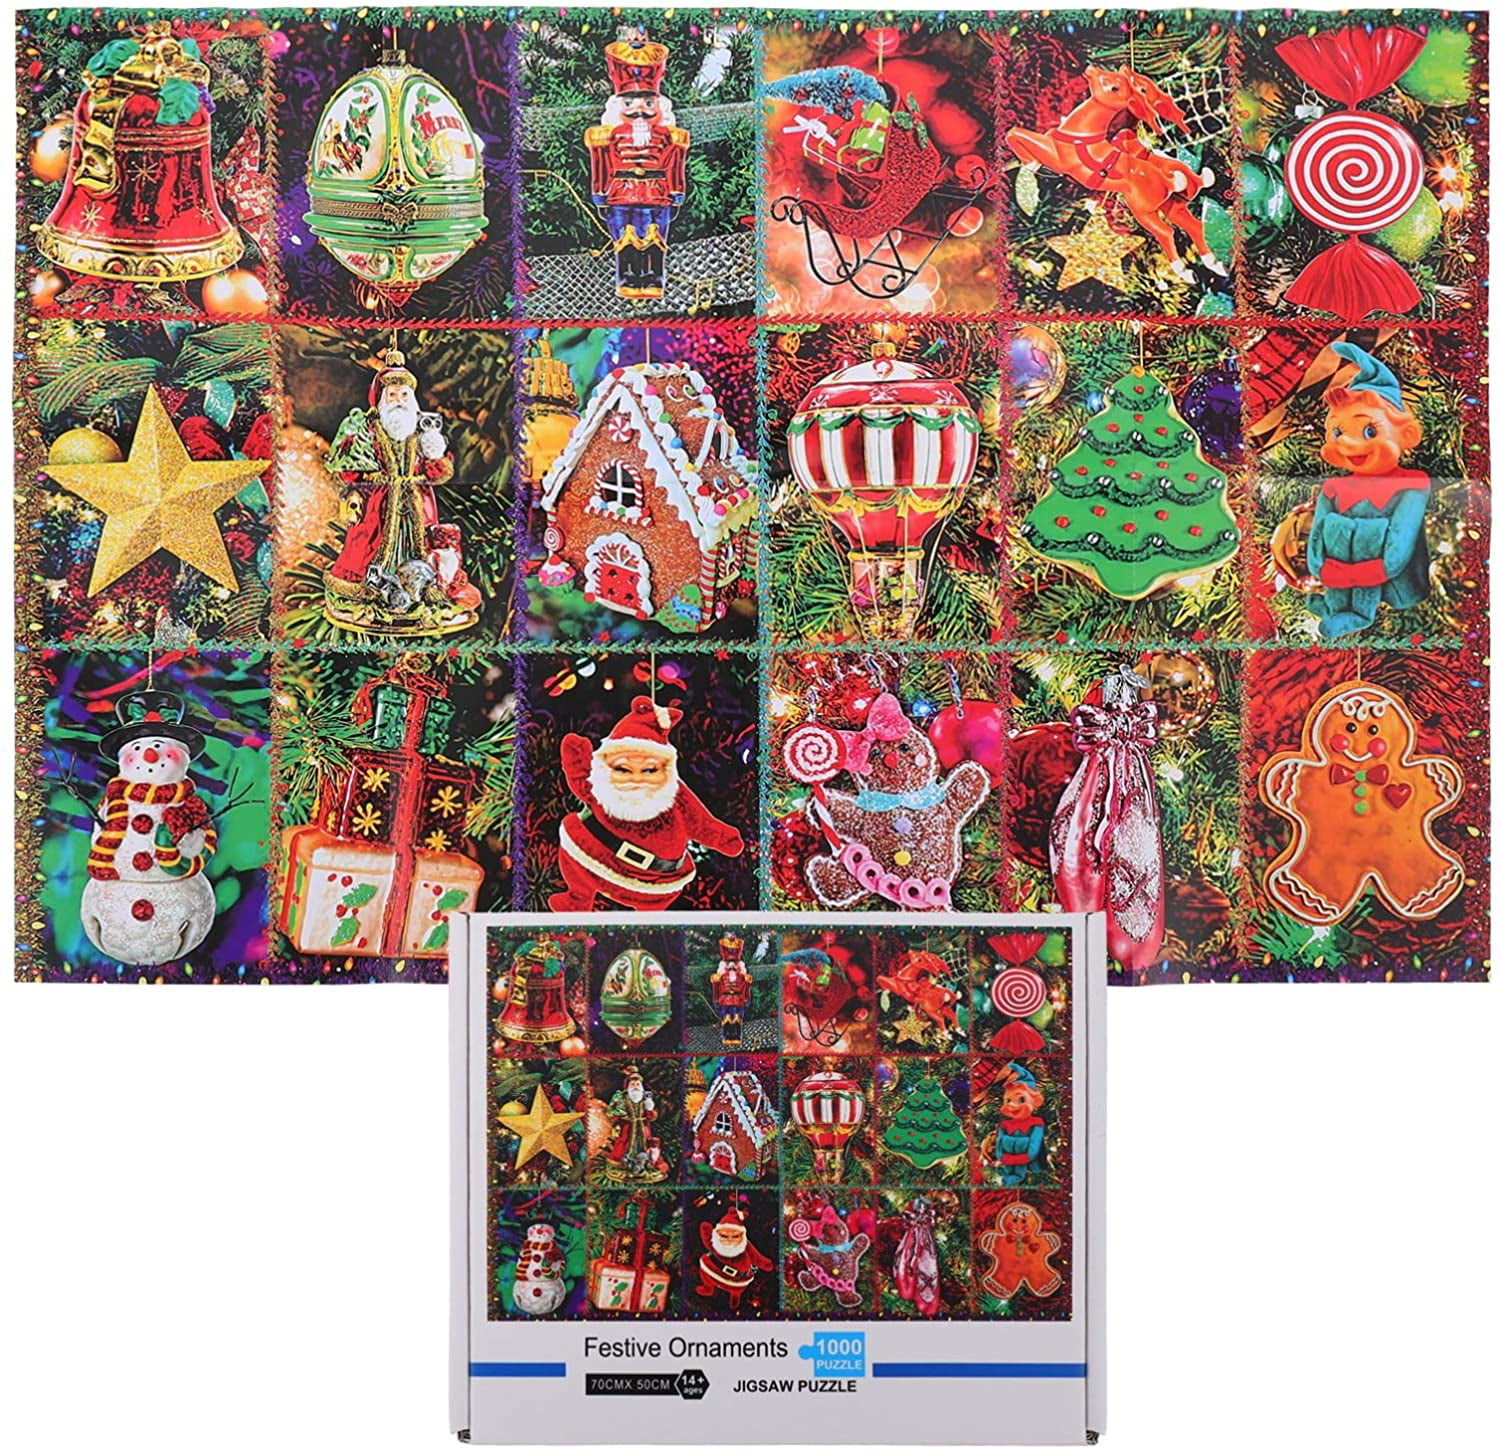 Sale 6 Patterns 1000 Pieces Jigsaw For Kids Adults Puzzles Toys & Games 